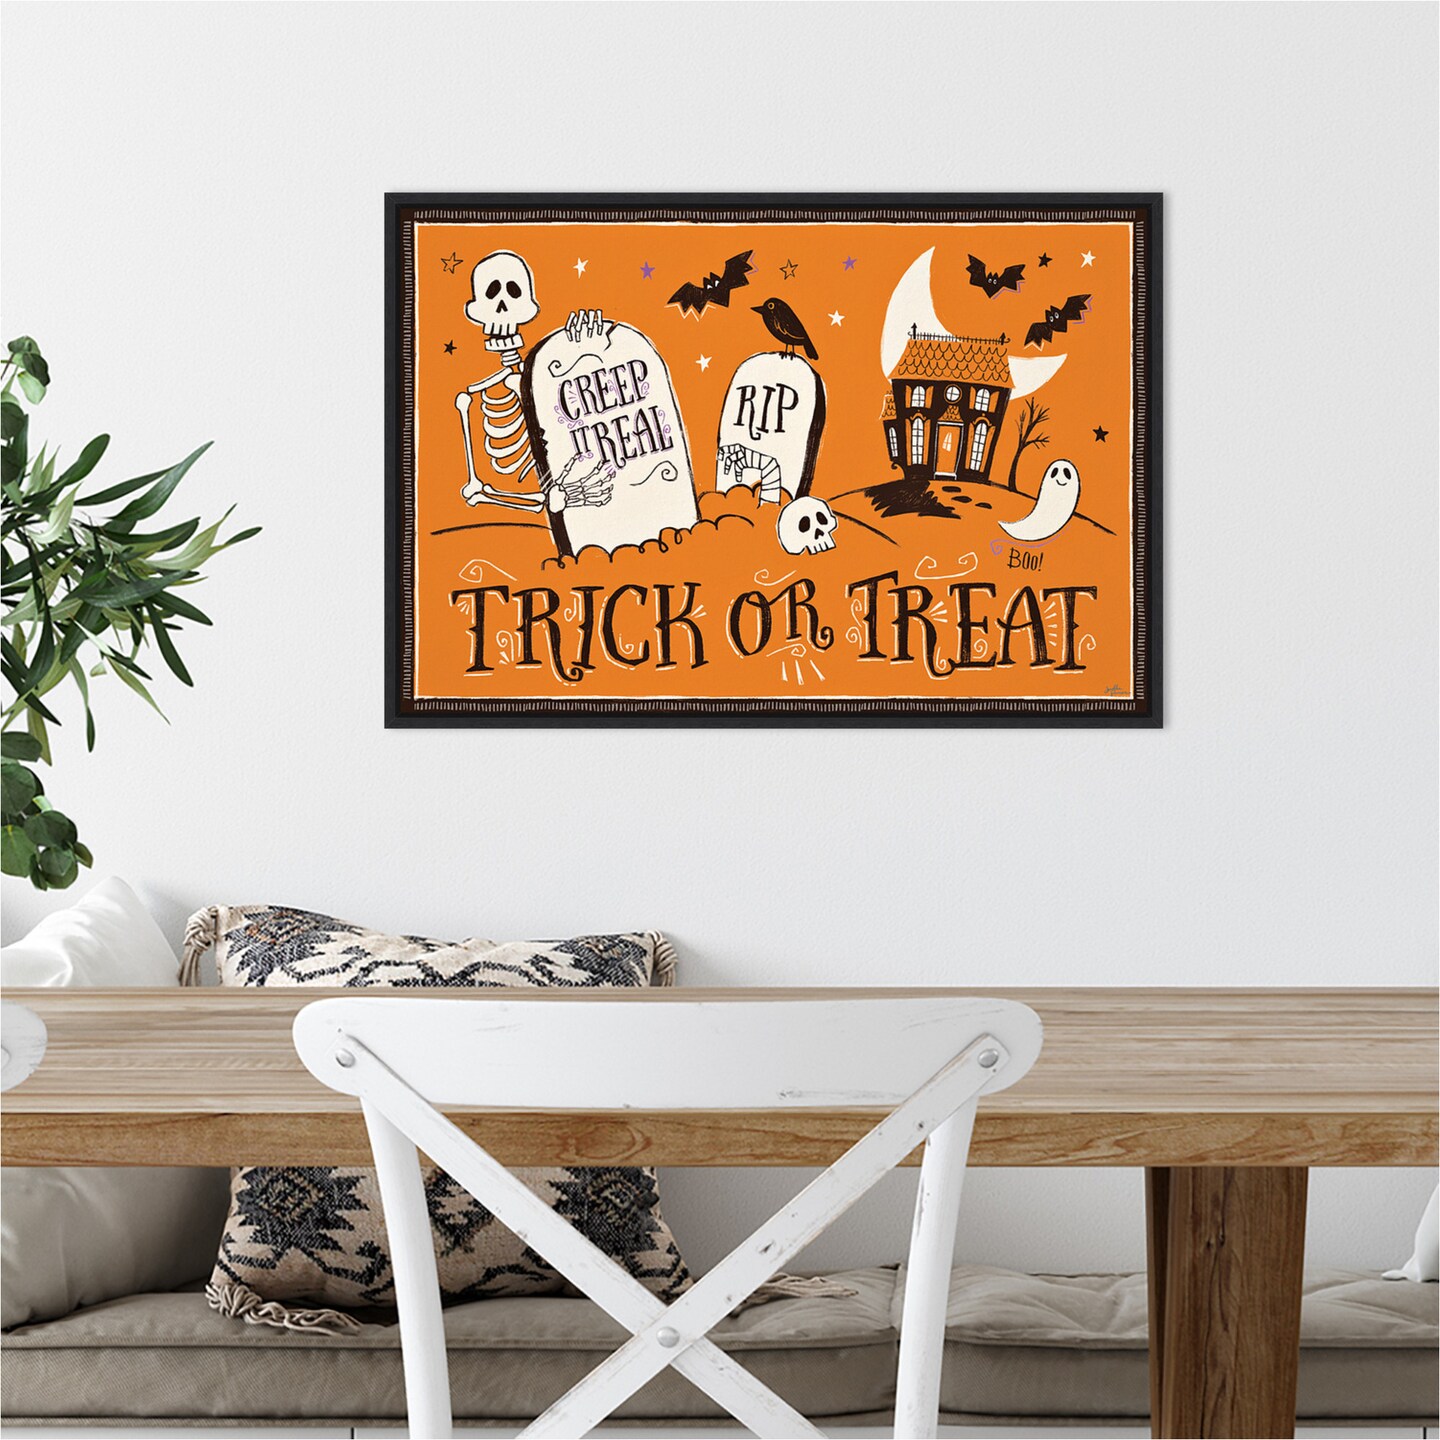 Spooktacular XI by Janelle Penner 23-in. W x 16-in. H. Canvas Wall Art Print Framed in Black